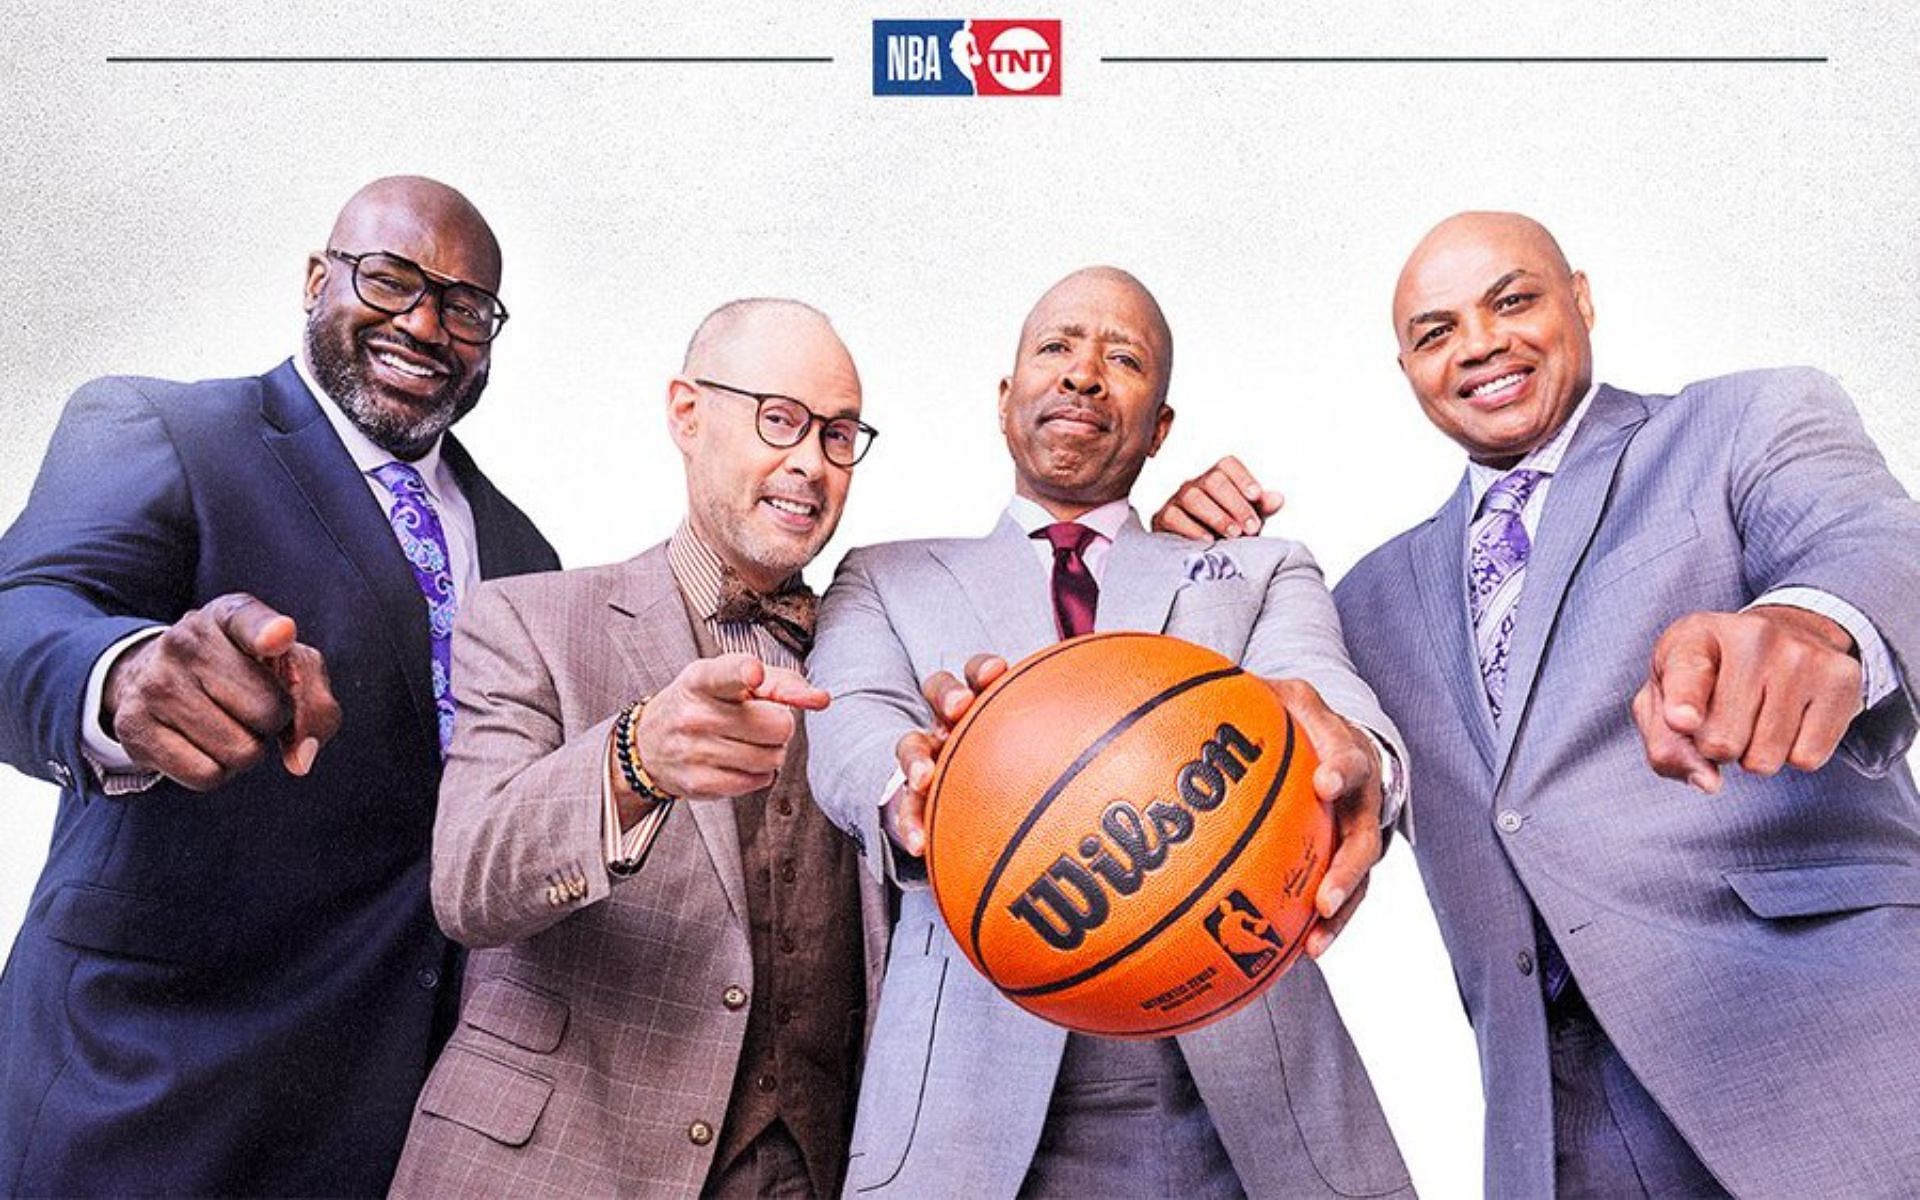 Looking at the 5 funniest incidents from Inside the NBA featuring Charles Barkley's 'San Antonio women' rant, Shaquille O'Neal falling, and more